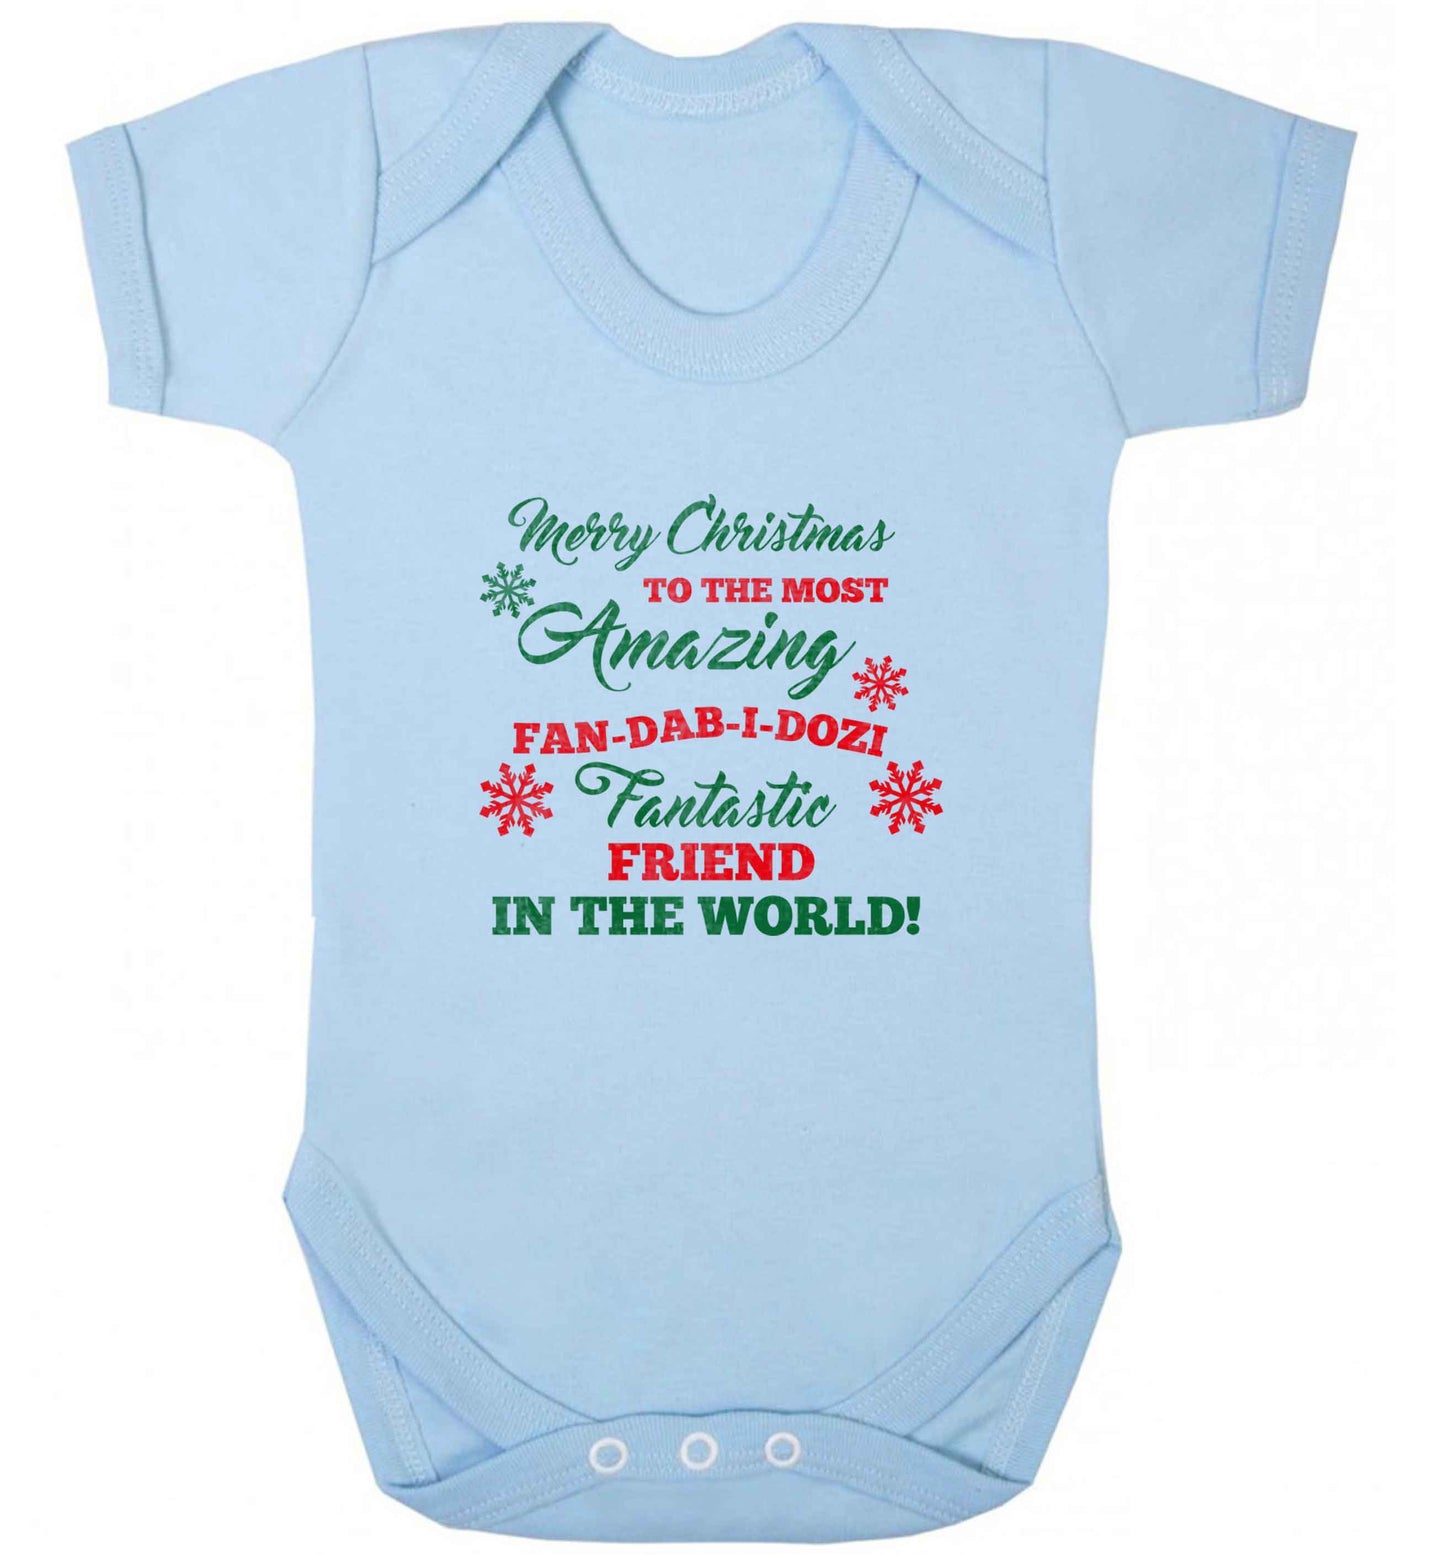 Merry Christmas to the most amazing fan-dab-i-dozi fantasic friend in the world baby vest pale blue 18-24 months